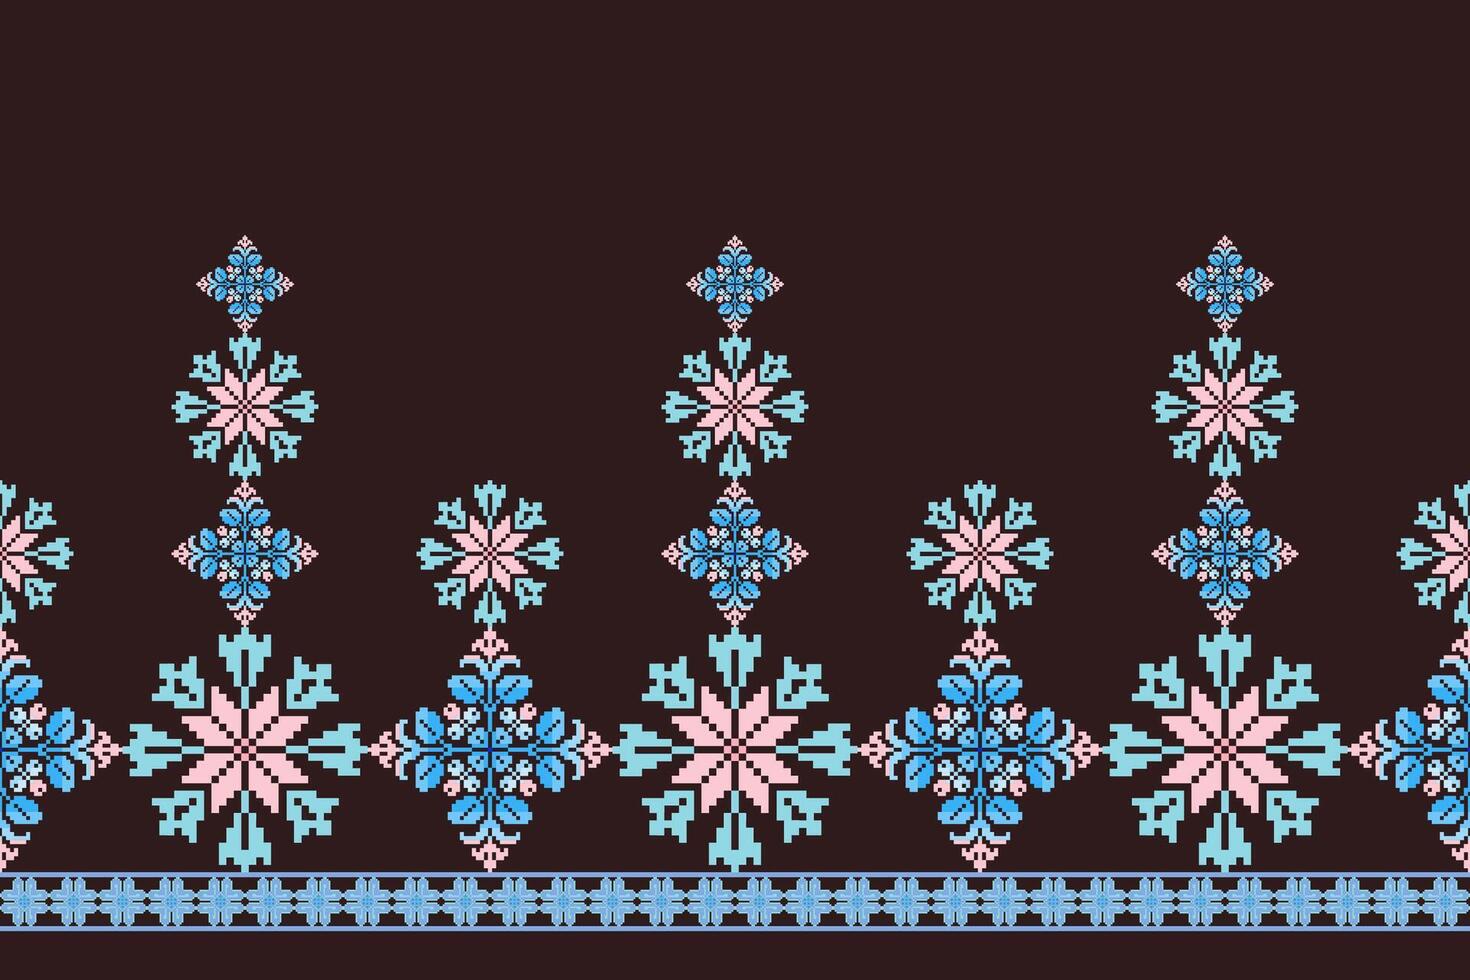 Geometric ethnic floral pixel art embroidery, Aztec style, abstract background design for fabric, clothing, textile, wrapping, decoration, scarf, print, wallpaper, table runner. vector